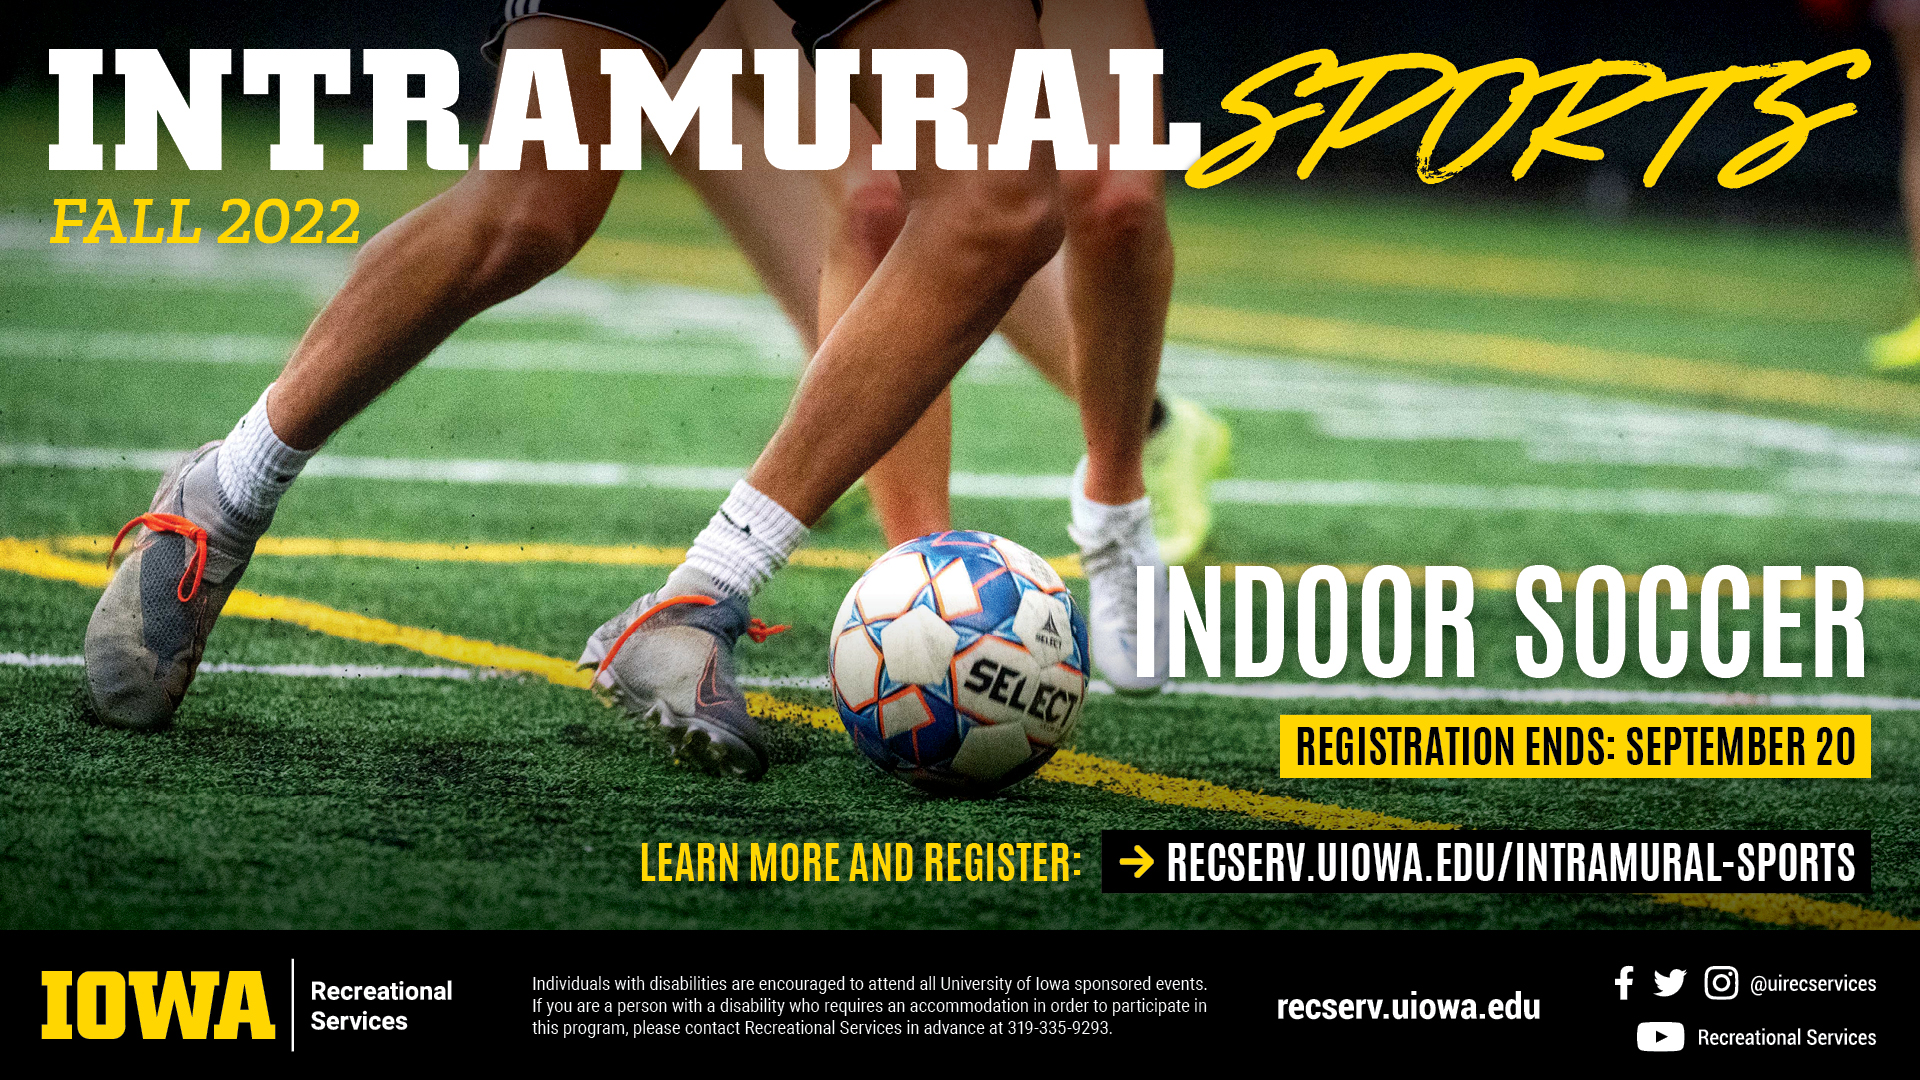 Intramural Sports Fall 2022: Indoor Soccer. Learn more and register at reserv.uiowa.edu/intramural-sports